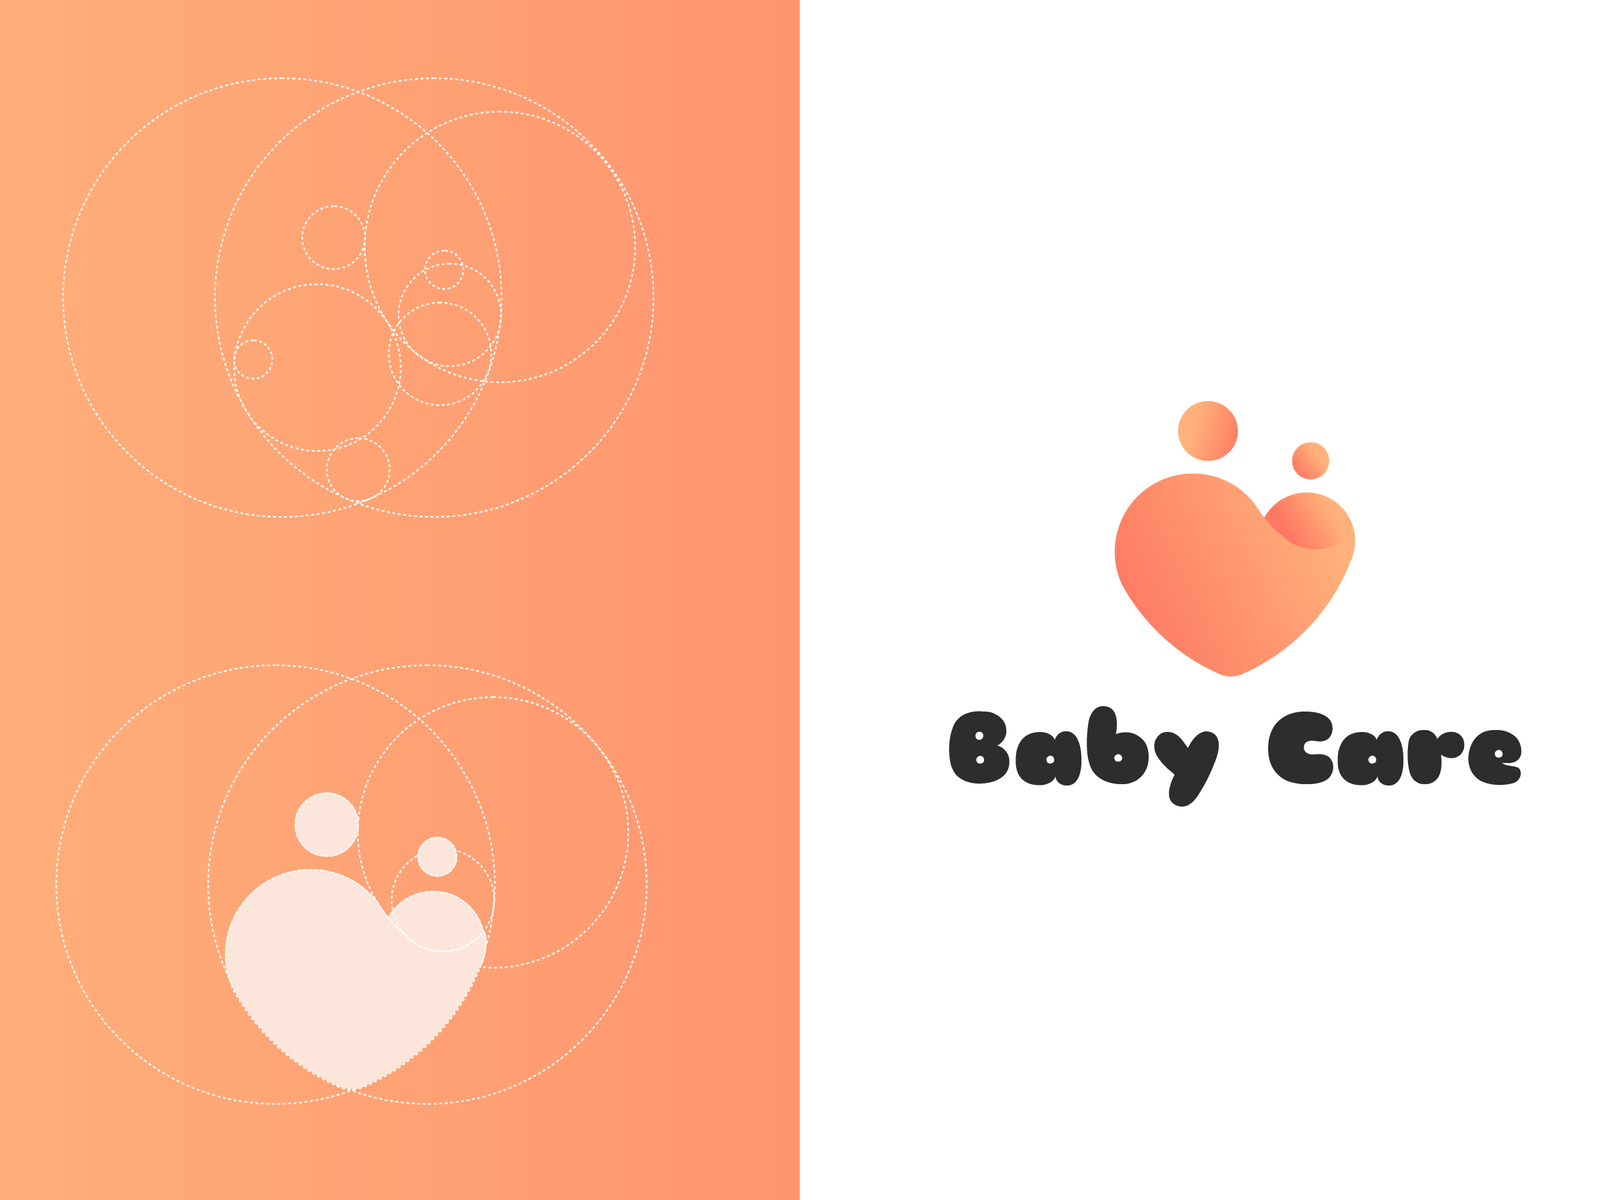 Baby care logo design emblem with pink Royalty Free Vector